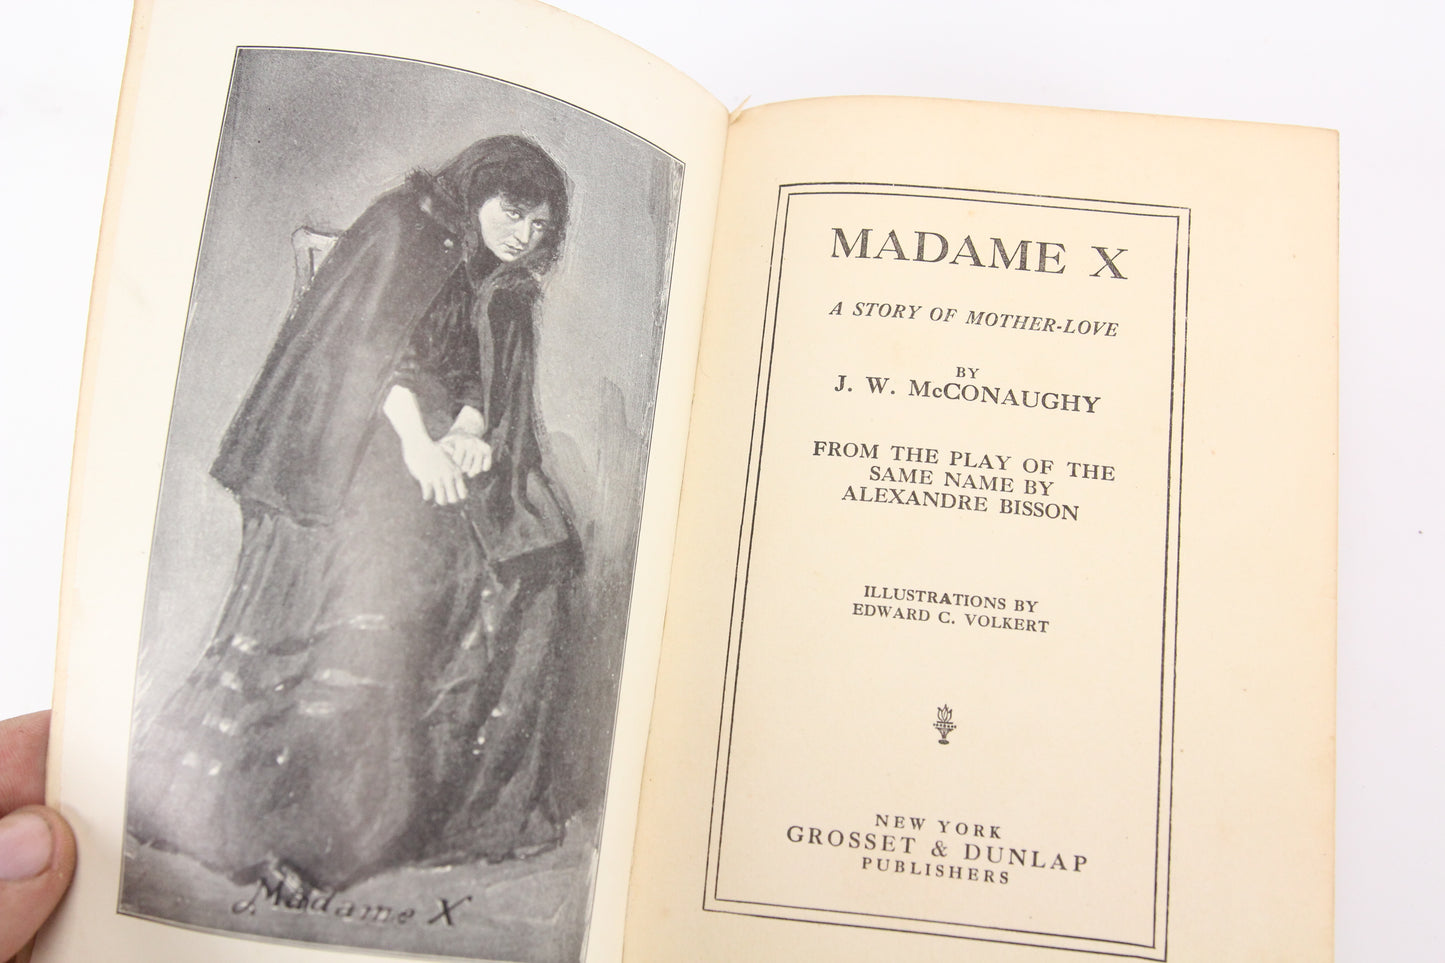 Madame X by J.W. McConaughy, After the Play by Alexandre Bisson, Copyright 1910